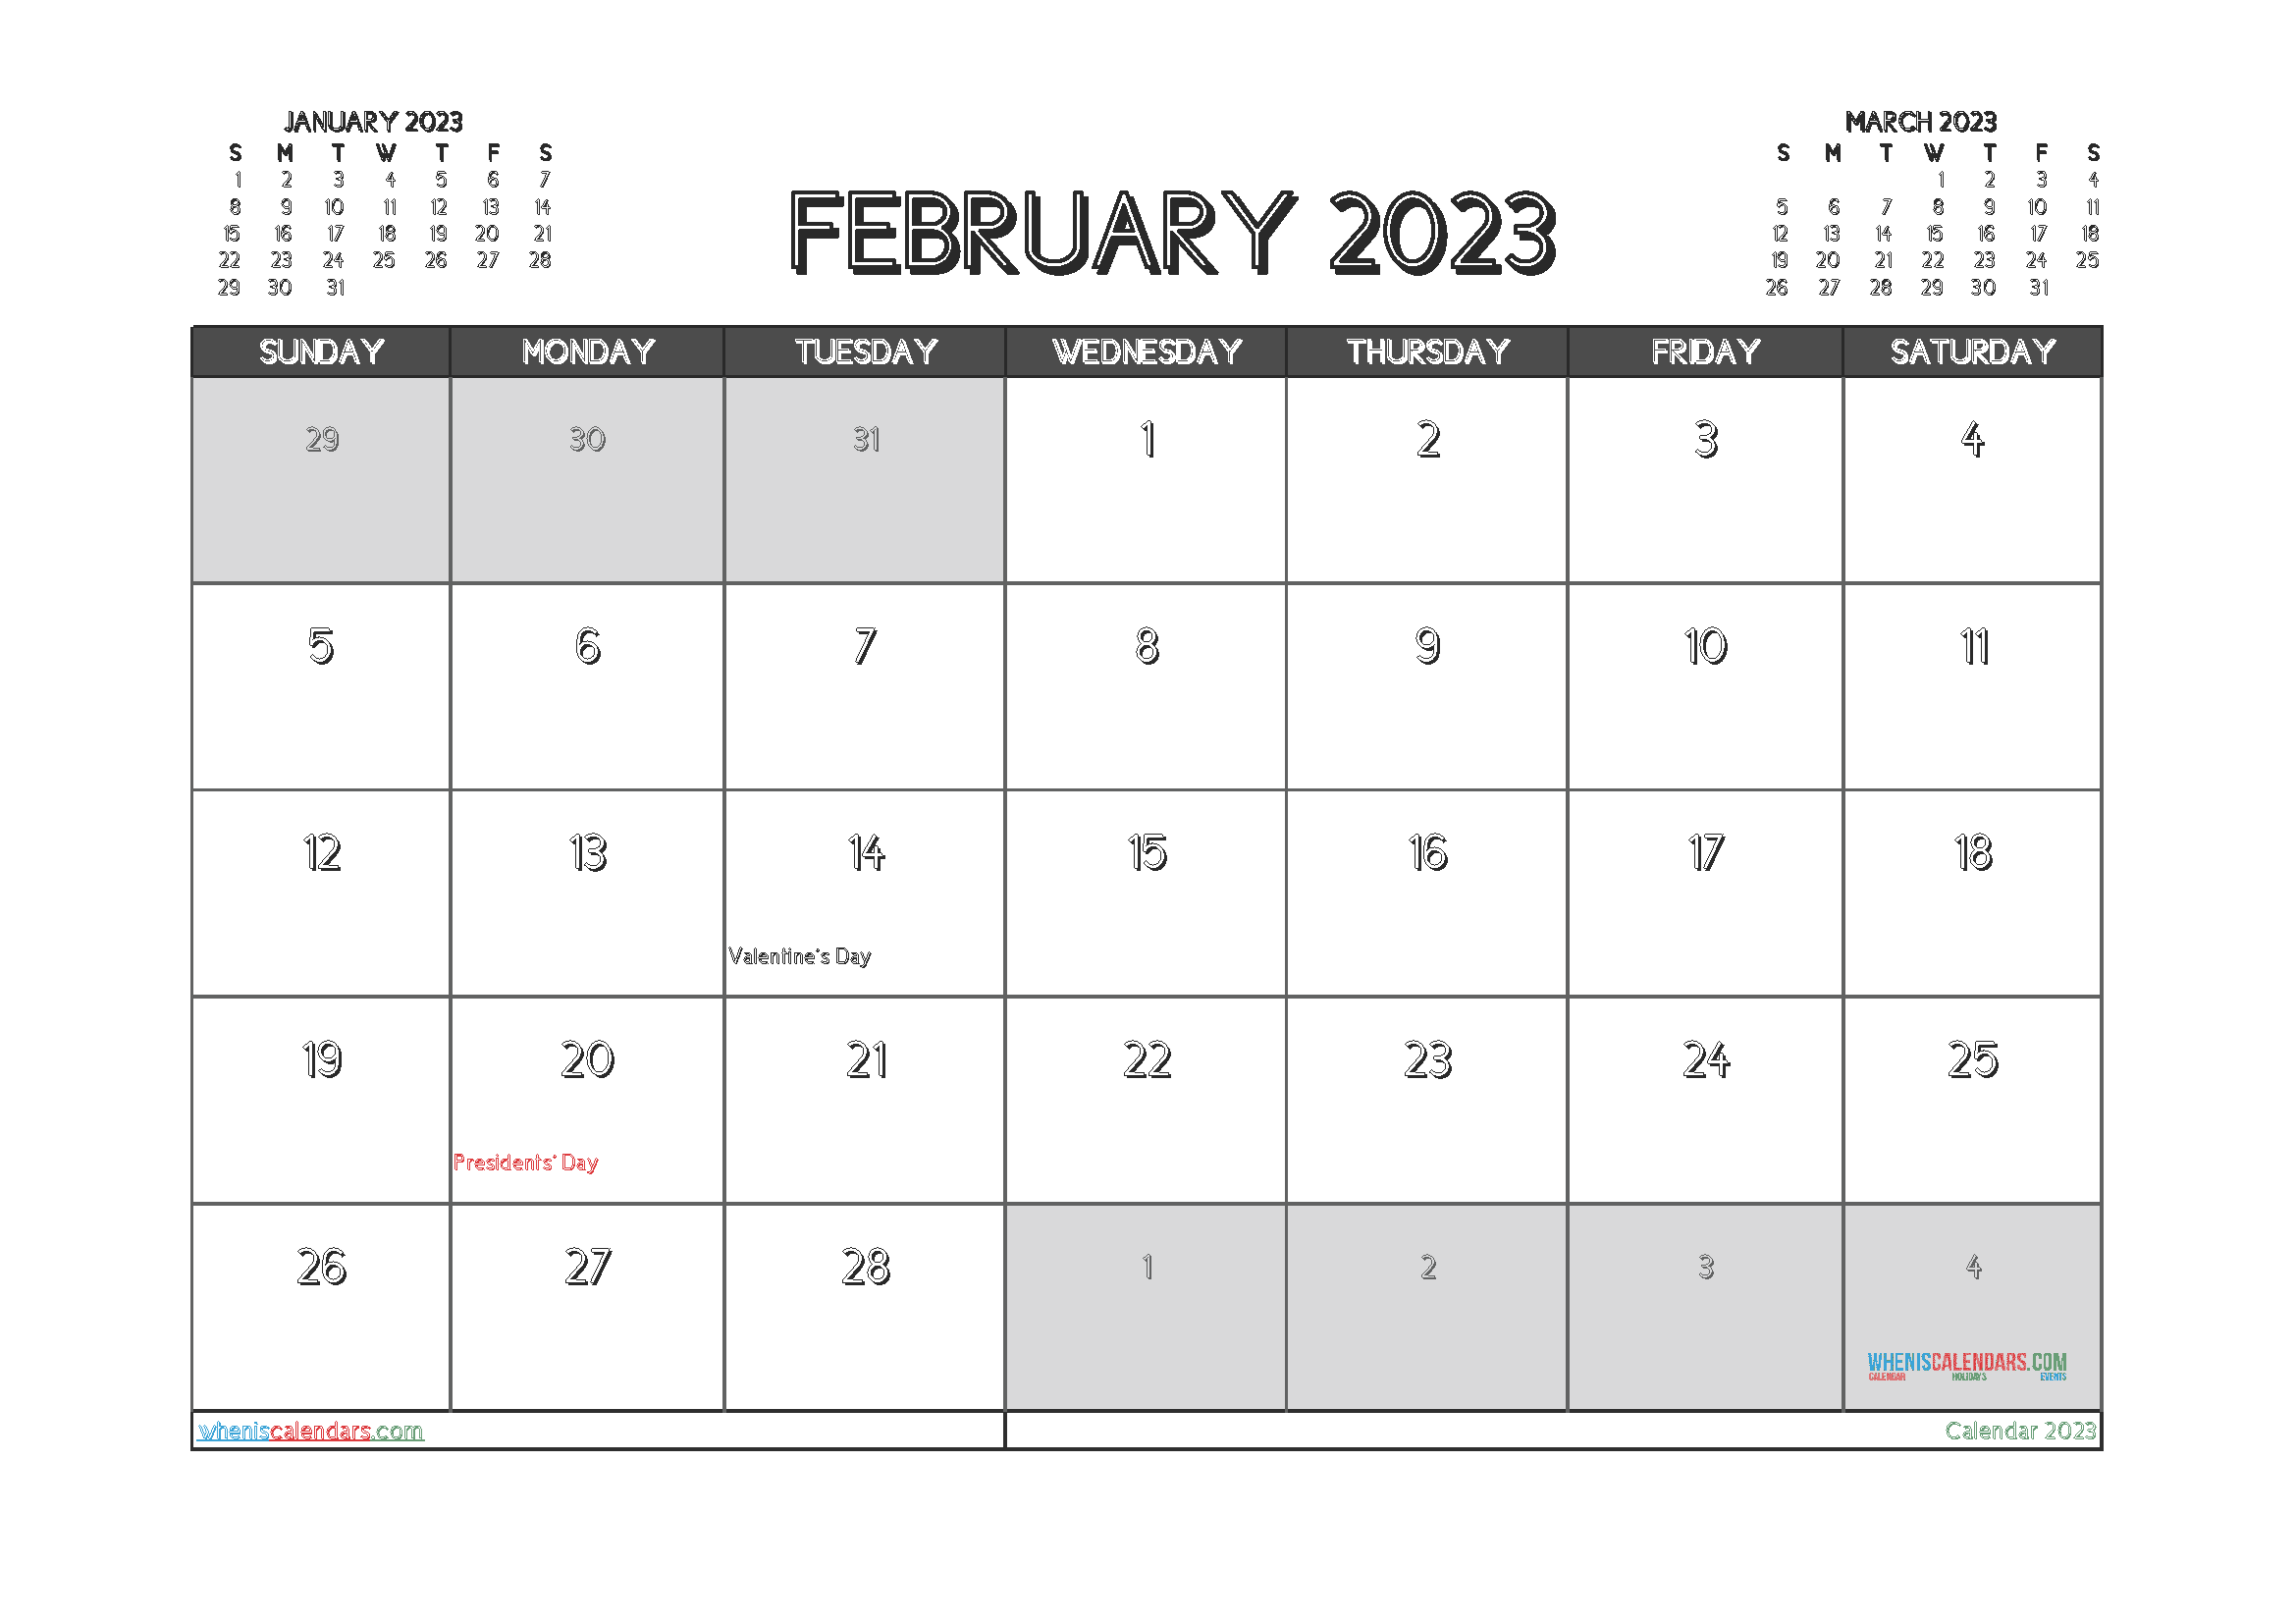 Free Printable February 2023 Calendar with Holidays PDF in Landscape